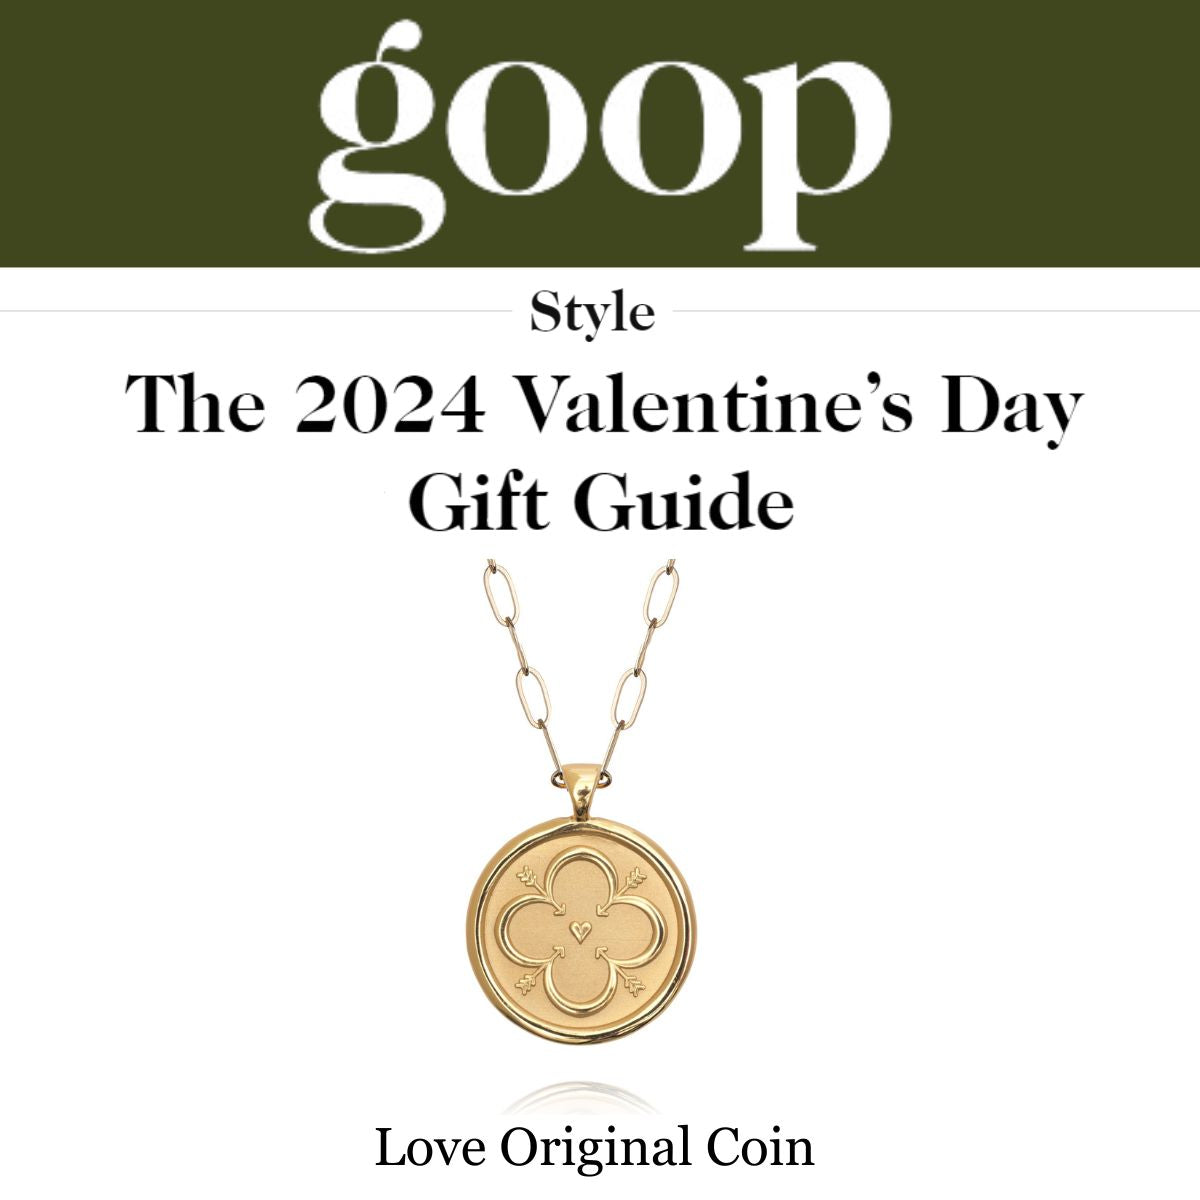 Press Highlight: Goop's 2024 Valentine's Day Gift Guide